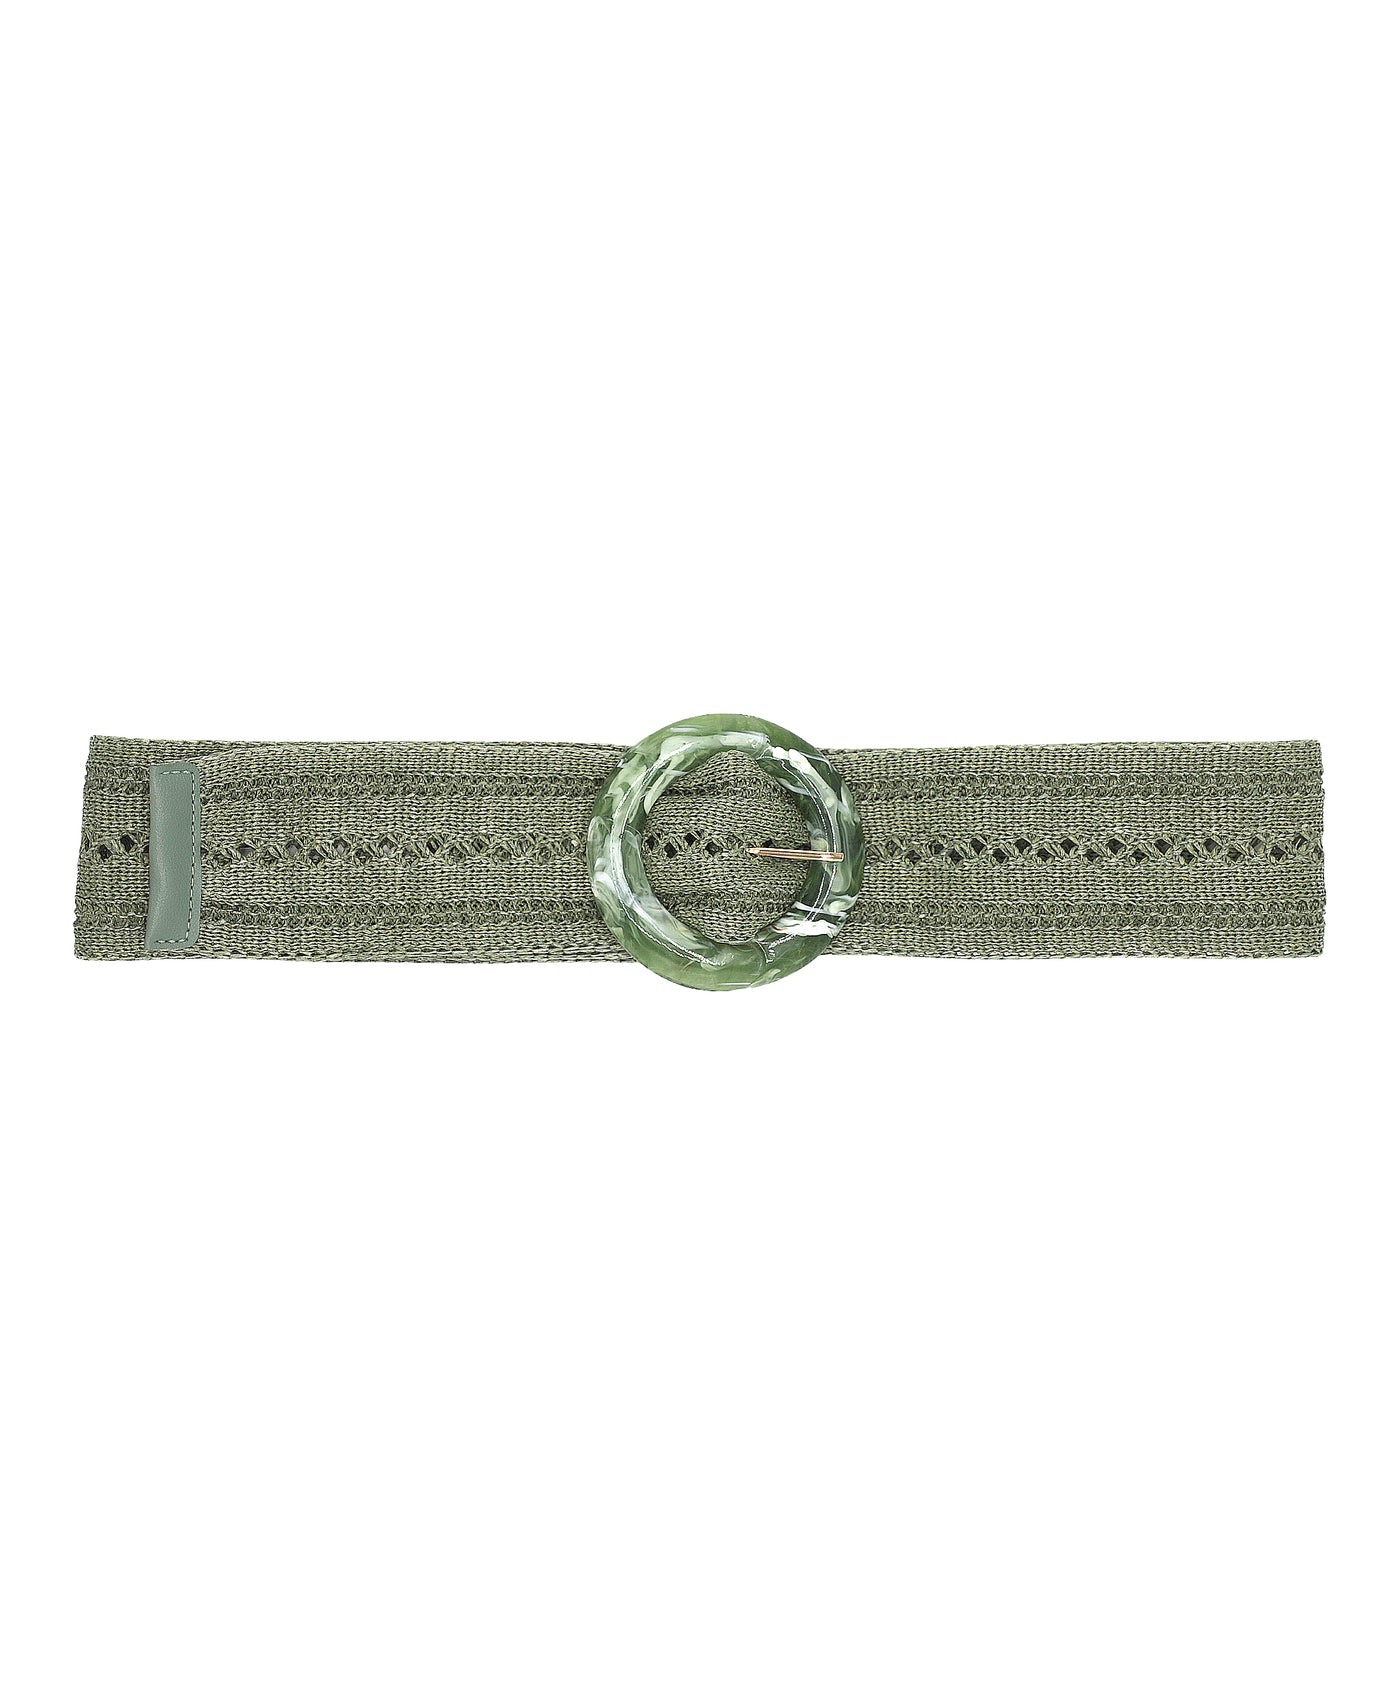 Woven Fabric Belt w/ Round Marble Buckle image 1